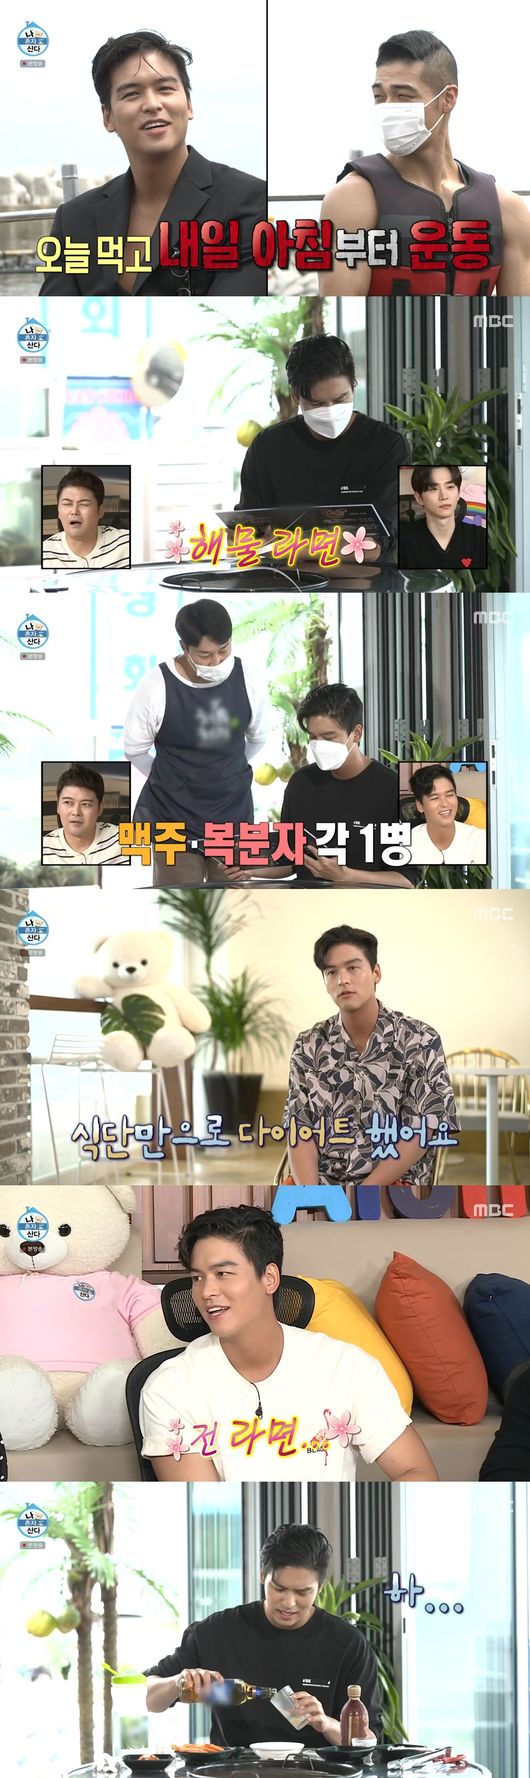 Lee Jang-woo has a Cheating Day after a successful dietIn MBC I Live Alone broadcast on the 3rd, Lee Jang-woo was shown to have a cheering day after the diet success.Lee Jang-woo said, I declared that I would diet for 100 days, so I thought I would die if I did not, he said. When I started dieting, it was 98kg and 31 ~ 32% body fat.Its 73kg, minus 25kg now, he said.Lee Jang-woo said he would take out the body fat rate by 10%, but it failed and took it by 16%.Lee Jang-woo laughed at taking a self-body profile photo in commemoration of the success of the diet.Lee Jang-woo had a Cheating Day after a long time, Lee Jang-woo said, On the last 30 days, I had almost no Cheating Day.Junho said, I ate a lot of shrimp cookies after the diet, and I think I ate 10 bags at once because I wanted to eat salty.Lee Jang-woo ordered beer and bokbunjaju at the shell roast house; Lee Jang-woo took the aroma of the beer and shot one straight away.Lee Jang-woo said, When I gulped over my mouth, I felt the refreshing feeling of wheat. Lee Jang-woo then started eating a four-speed shell roast.Lee Jang-woo admired after eating conchizLee Jang-woo was hooked on scallops; Junho said, I feel really arrogant when I eat after I eat.Lee Jang-woo couldnt hide his smile when he saw Instant NoodleLee Jang-woo said, Who invented the Instant Noodle? Instant Noodle is really so delicious.I can not compare the taste of eating after a month. Eat it, everyone. Live happily. Lee Jang-woo ate the instant noodle and ordered air rice and ate rice.Kian84, who saw this, laughed, saying, Jangwoo is likely to return soon. Lee Jang-woo continued the storm as if he had put a string of consciousness.Junho said, I am wrong about Cheating Day. It is Cheating Day to eat a lot of diet. Park Na-rae laughed, saying, I feel uncomfortable with Junho One.Lee Jang-woo said, I felt that I could not lose weight this time. I could change everything in 100 days.It was 100 days long, he said. 100 days ago, I was positive and bright, but more positive and bright.I was grateful and delighted that the Han River was so small that I was happy to be in Seoul. 